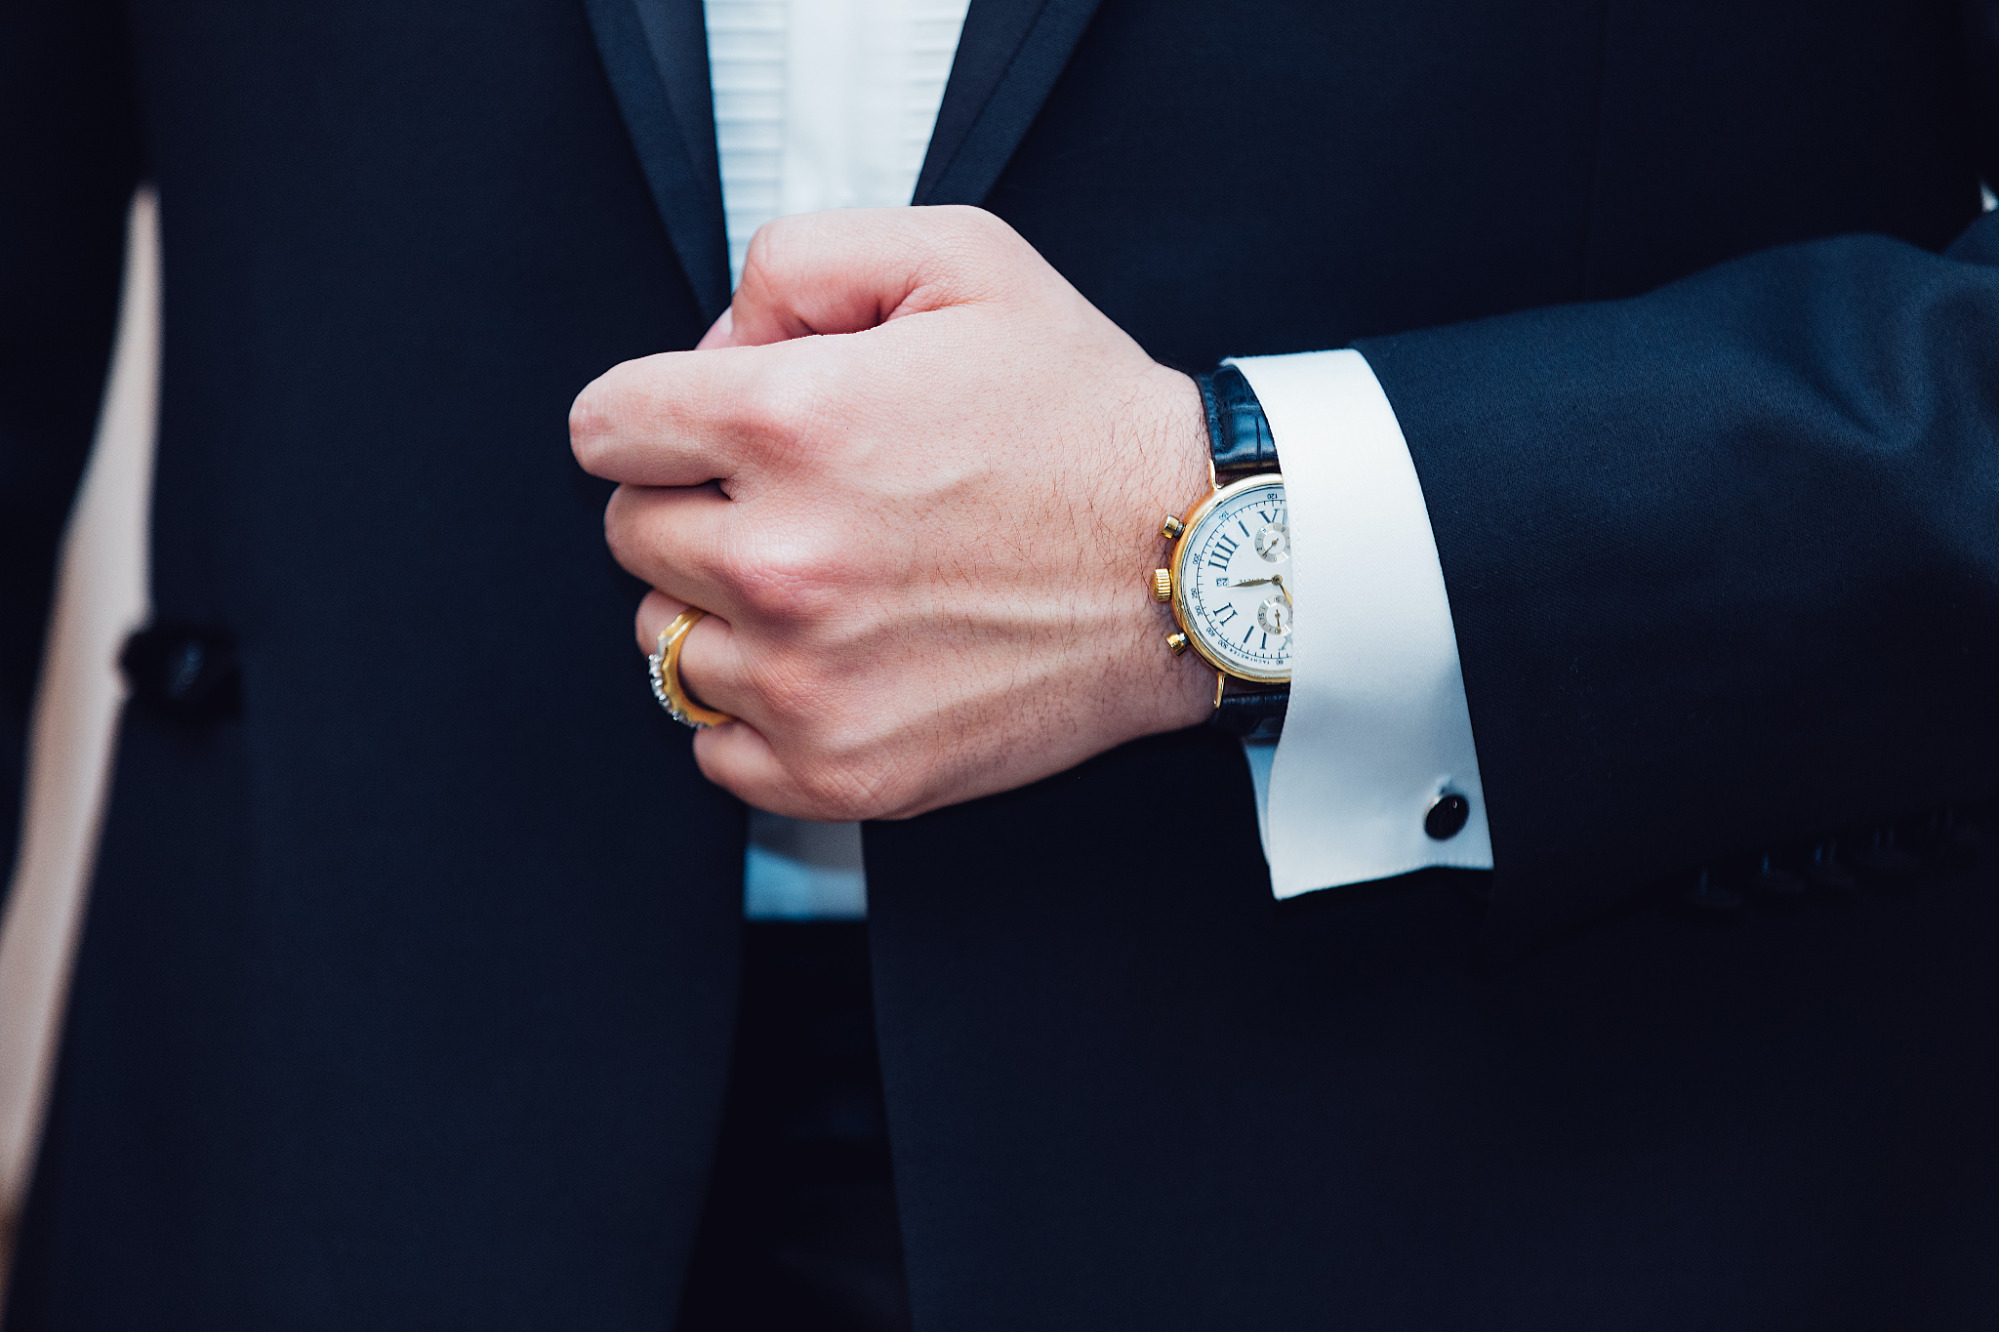 A man in a suit shows off his luxury dress watch